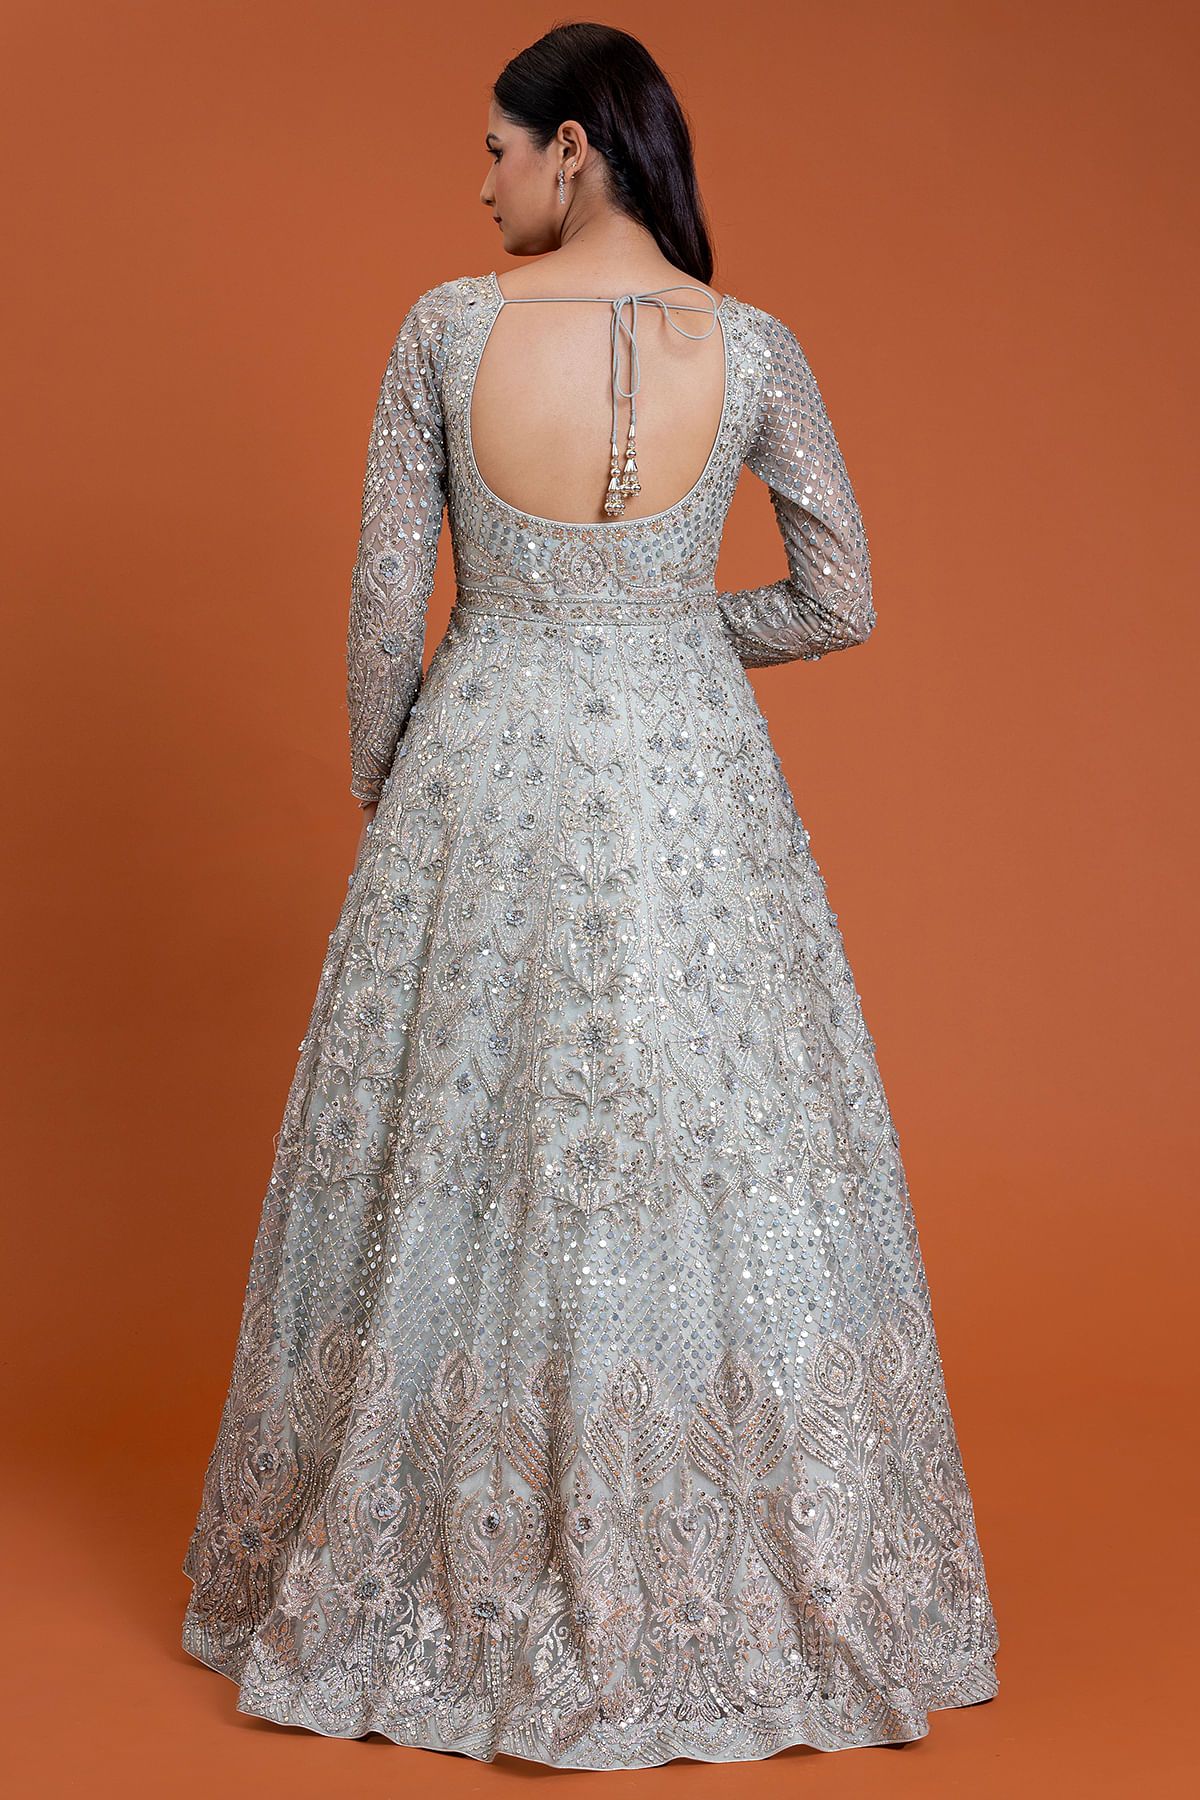 Grey Gowns Online: Latest Designs of Grey Gowns Shopping